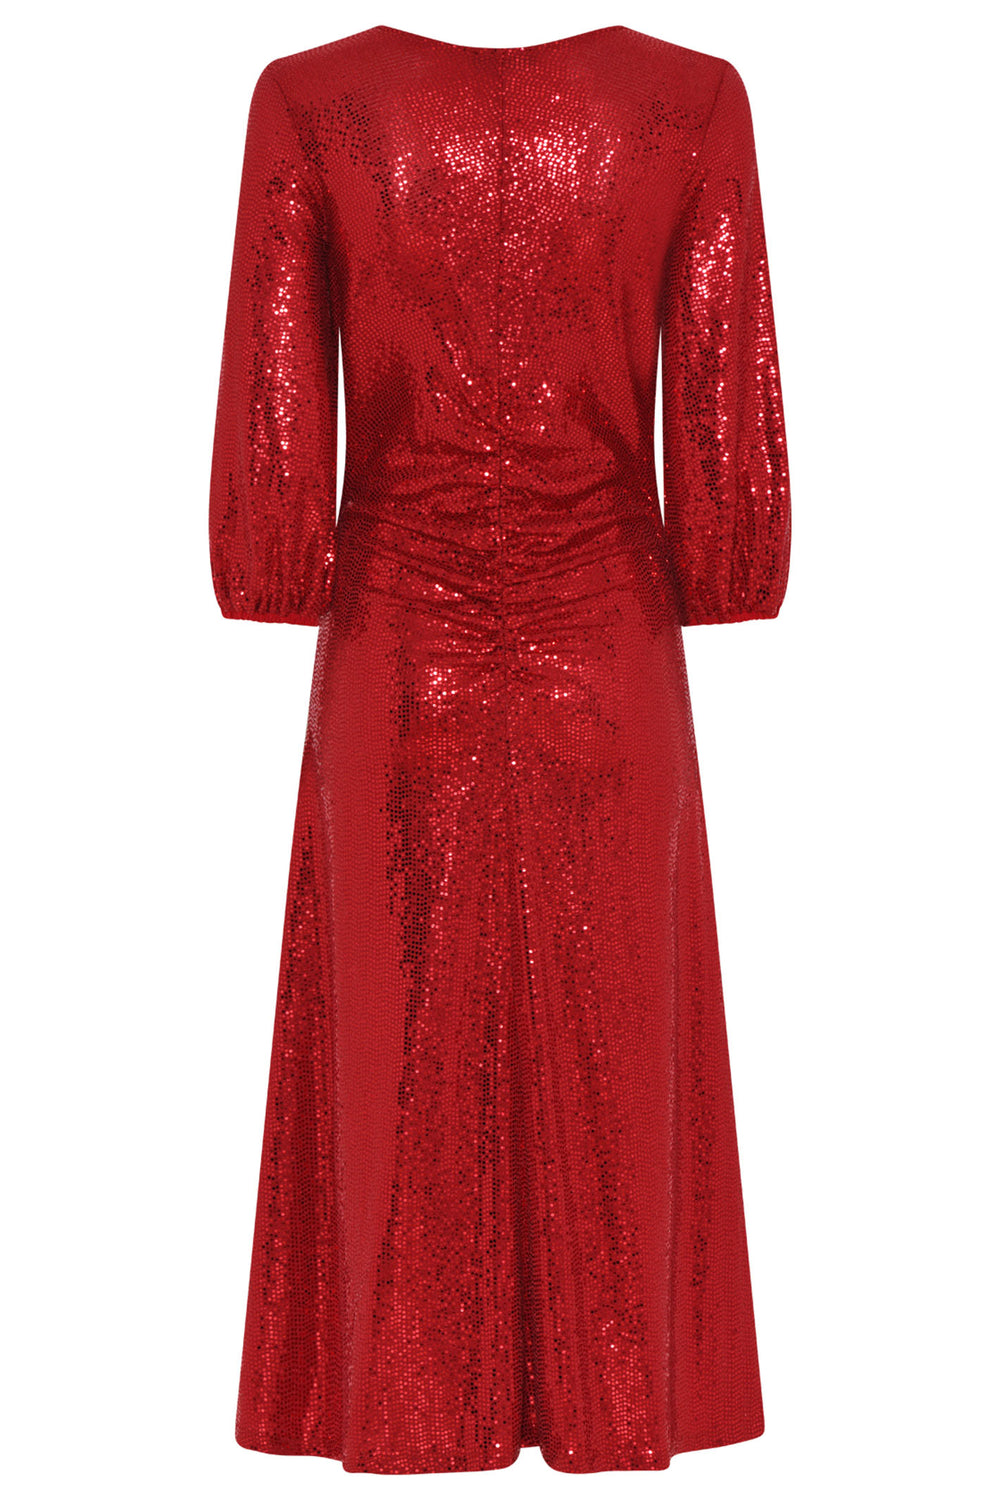 Tia 78519 Red Sequin Party Dress - Dotique Chesterfield